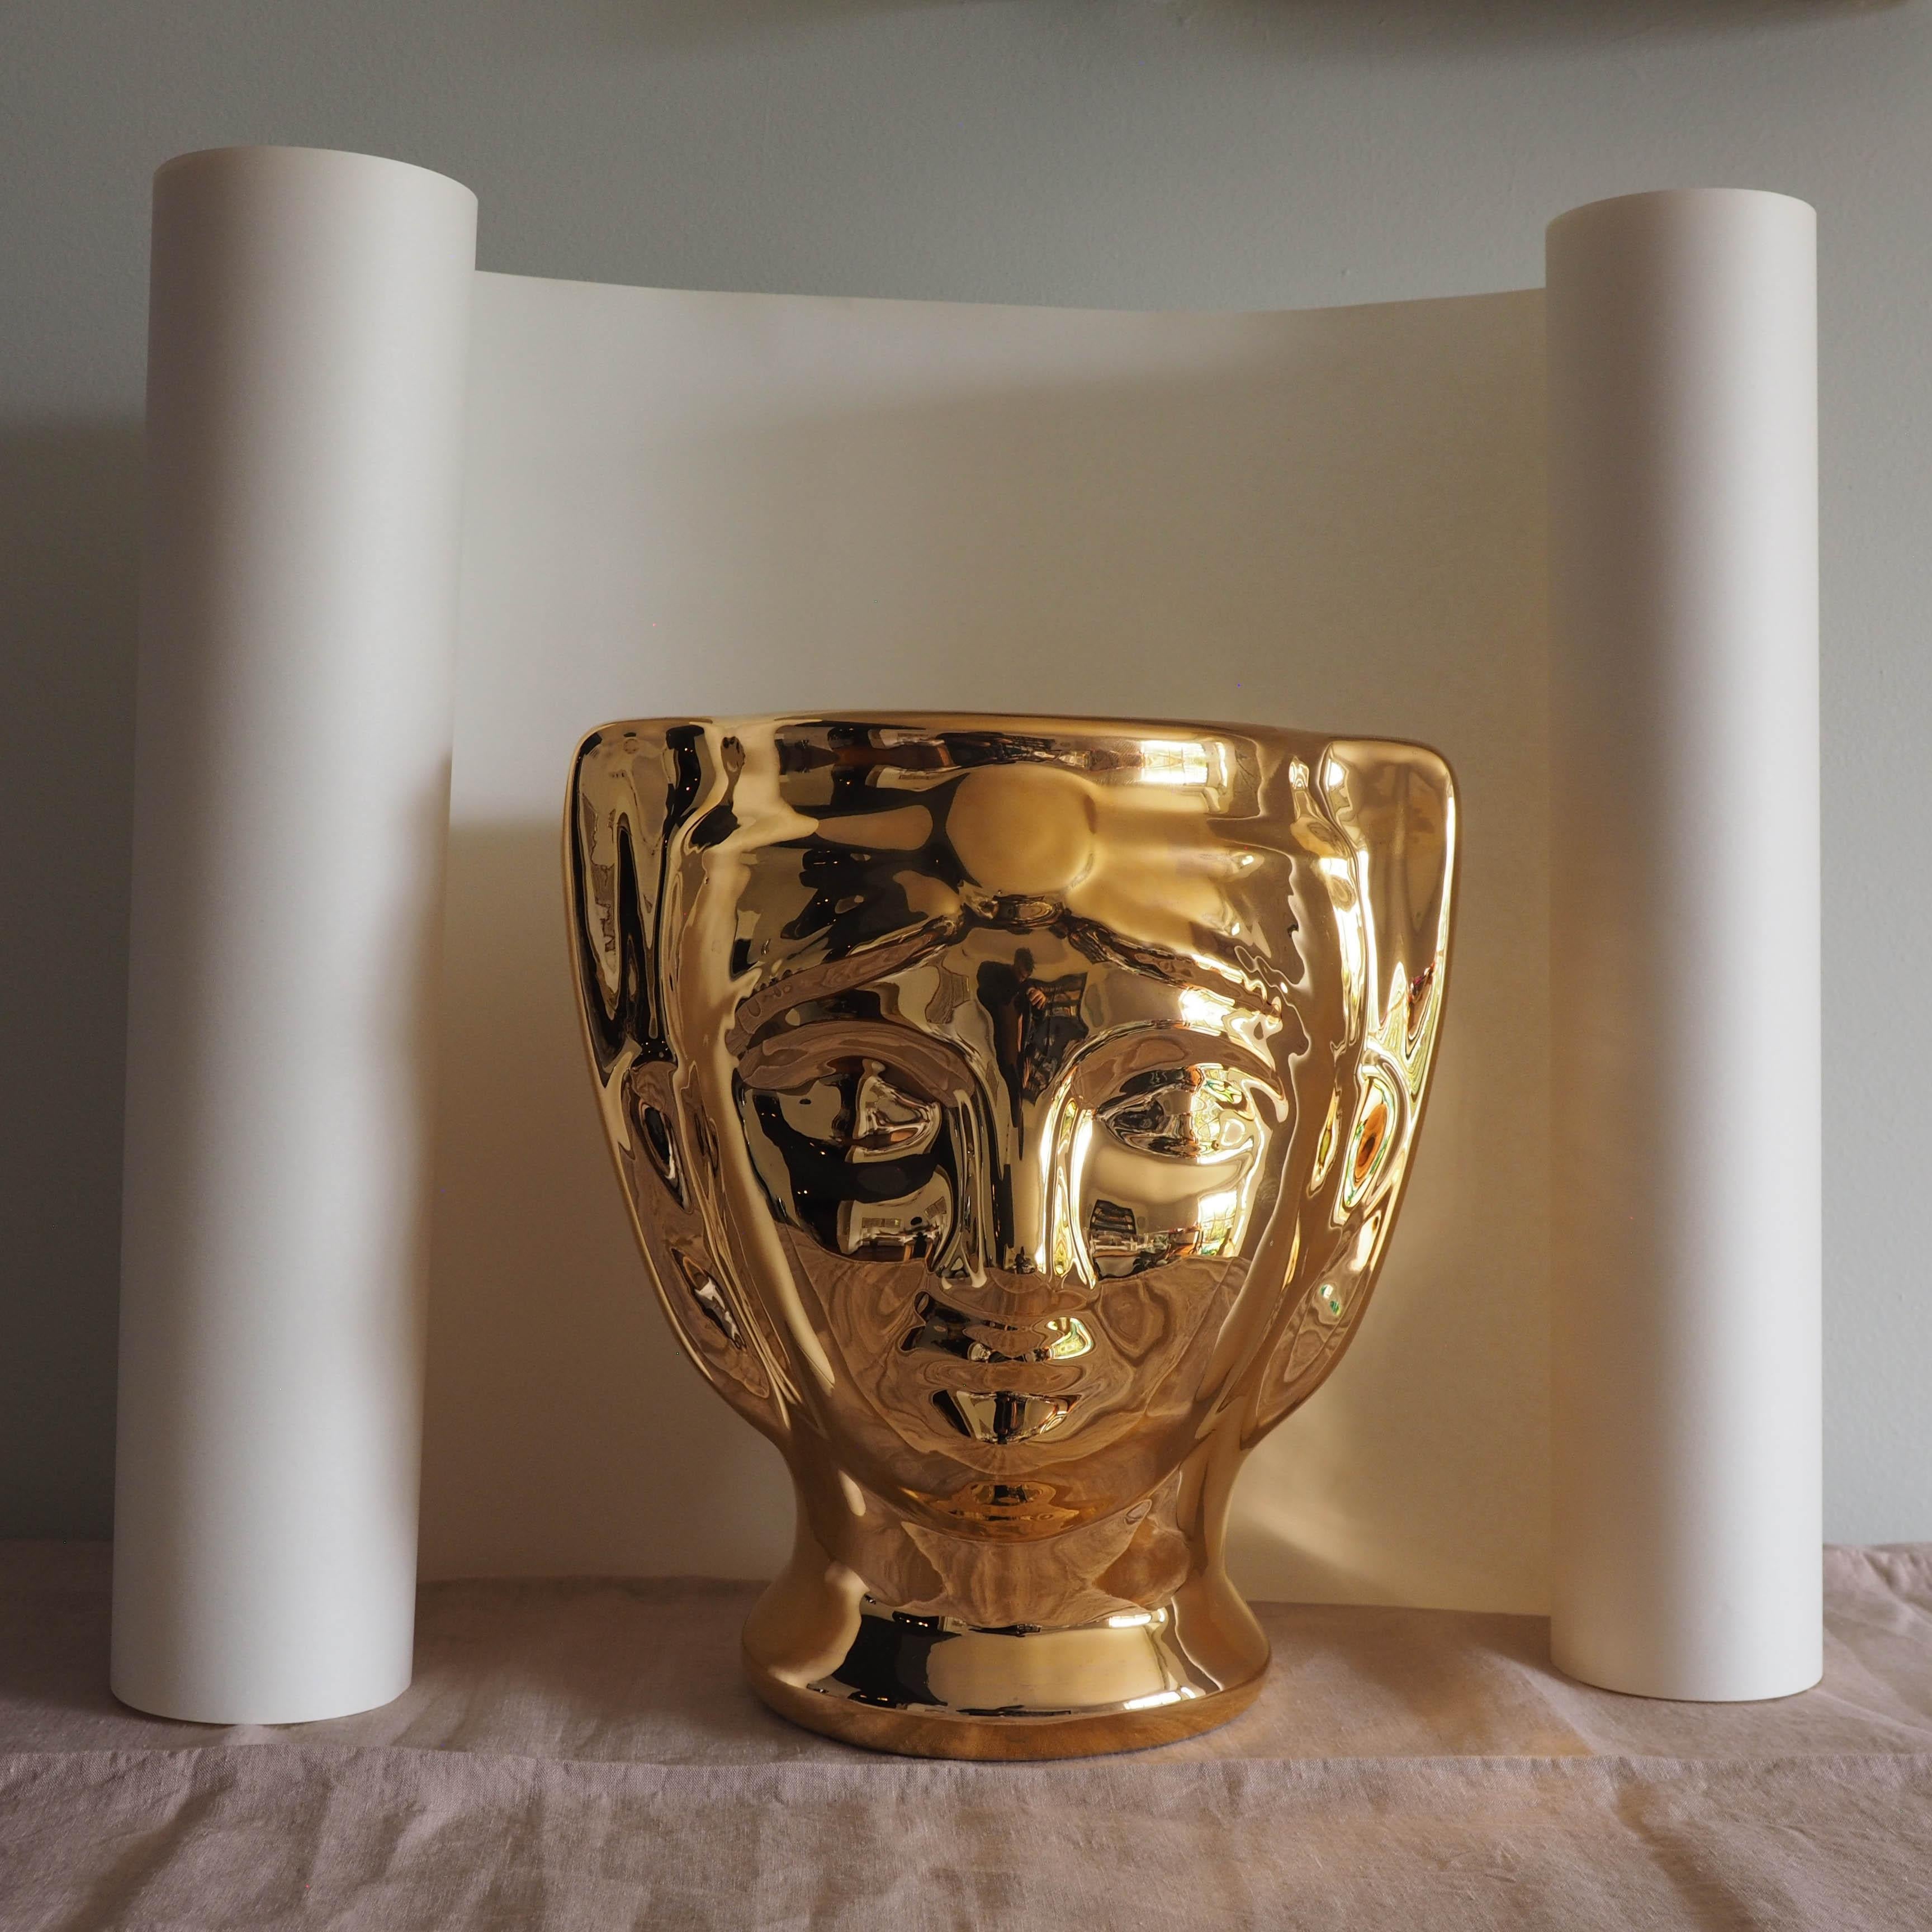 Hand-Crafted 21st Century, SicilianMoor's Head. Ceramic Vases, Gold. Hand Made Made in Italy  For Sale